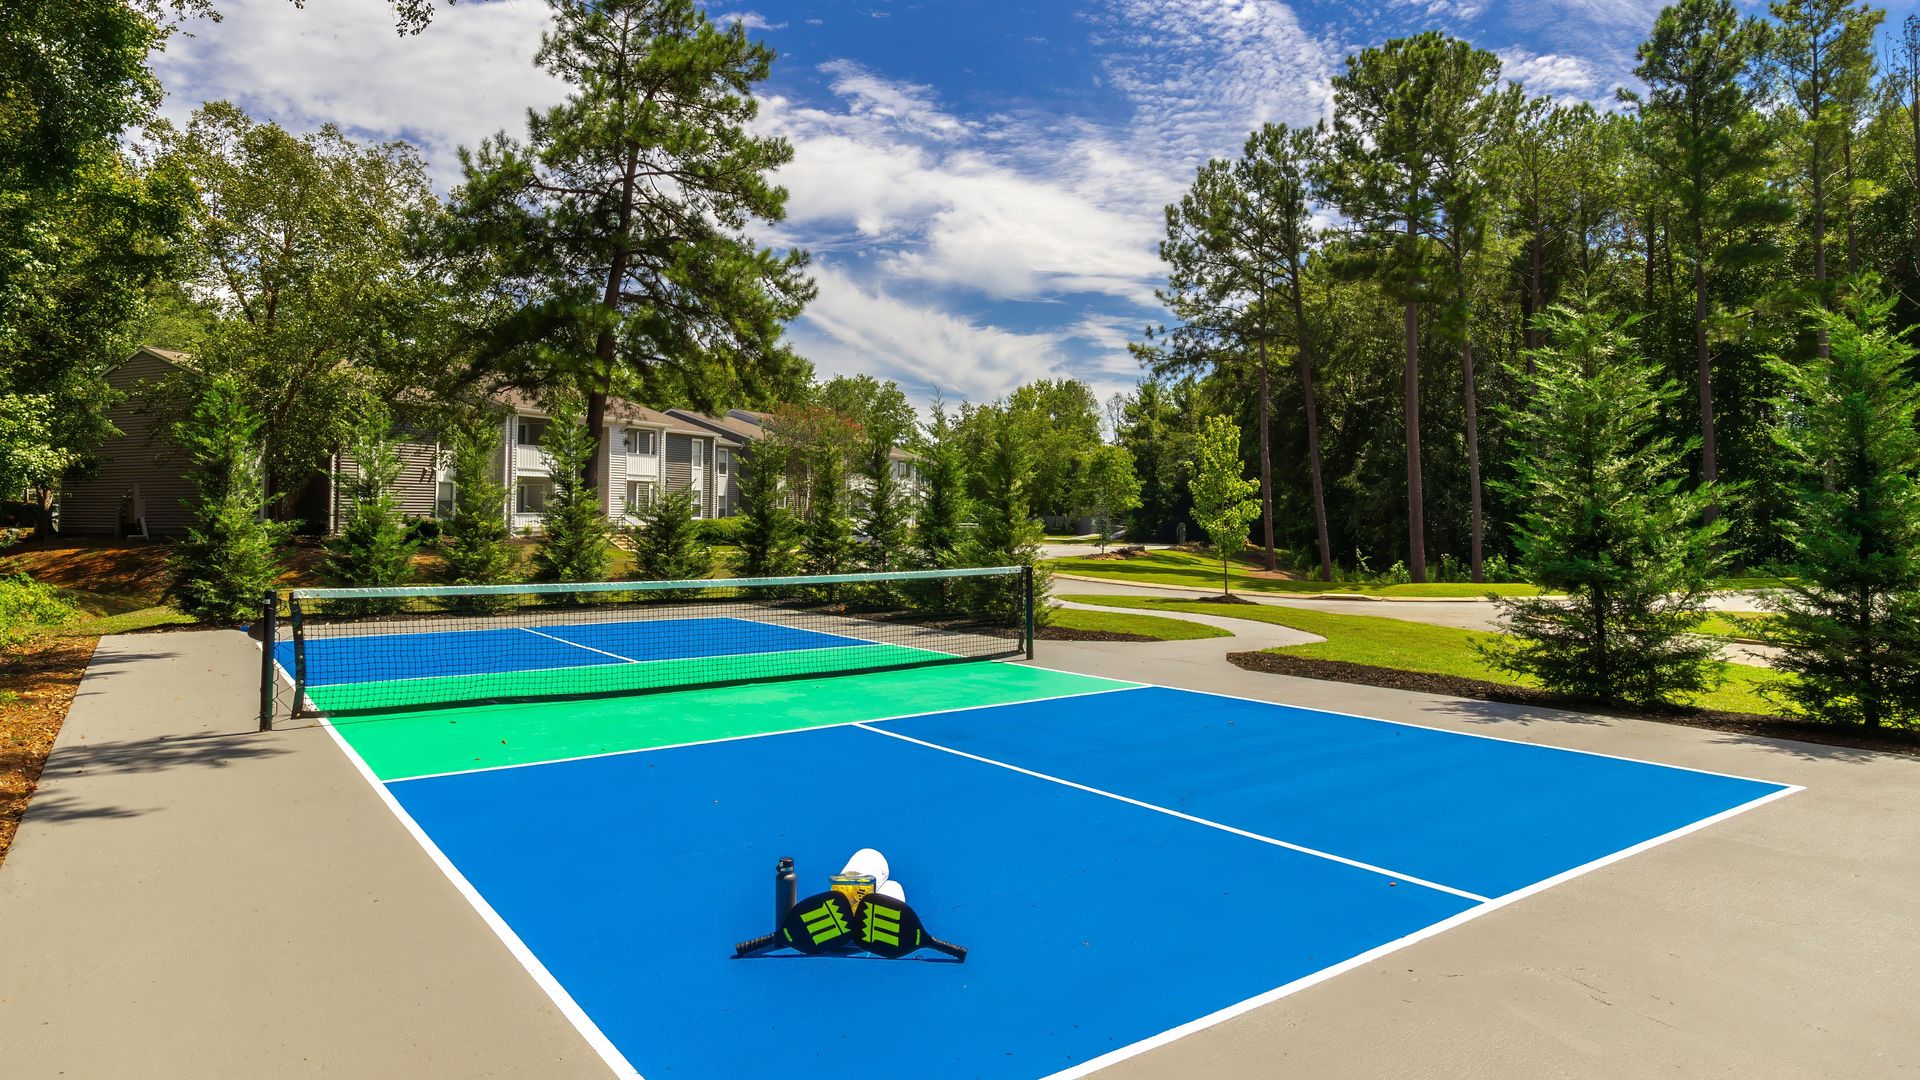 A freshly painted pickleball court stagged with paddles and balls.